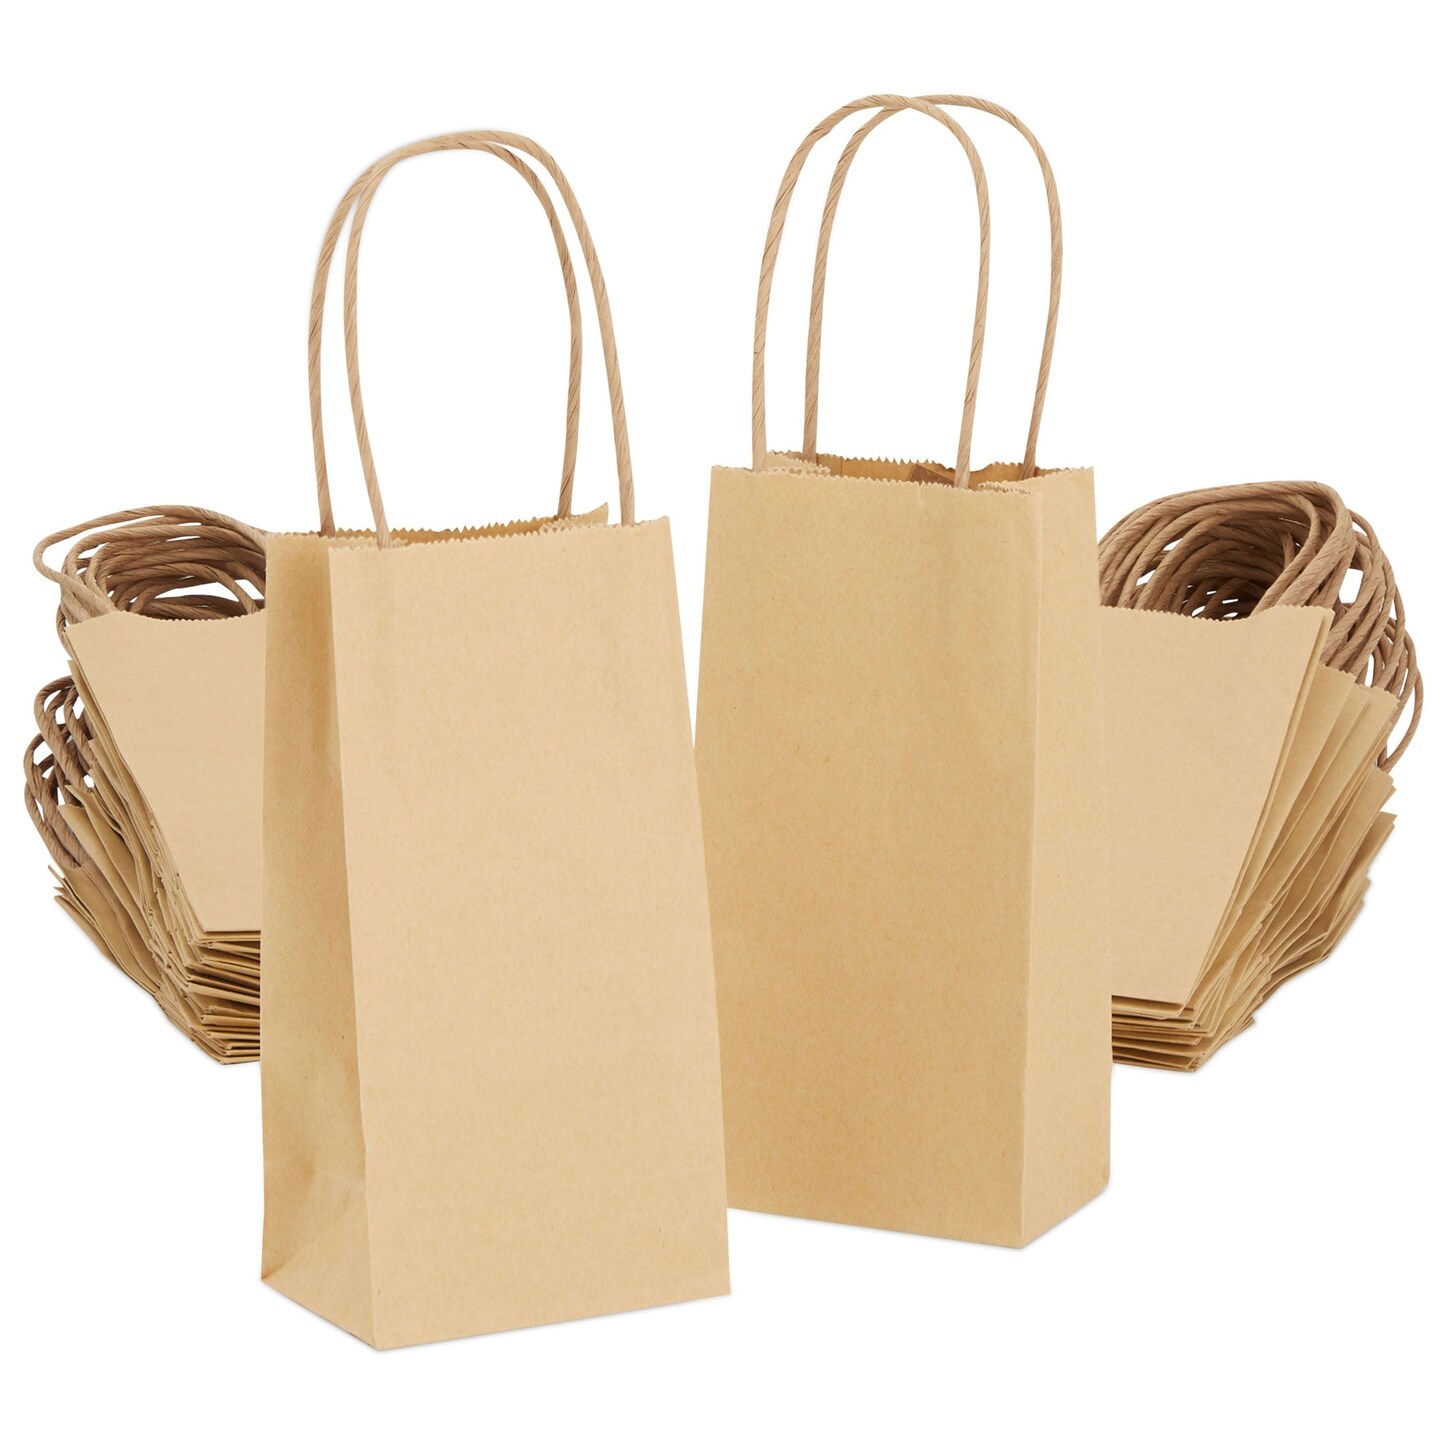 Juvale 36 Pack Small Kraft Party Favor Gift Bags with Handles for Birthday,  8.5 x 5.25 In